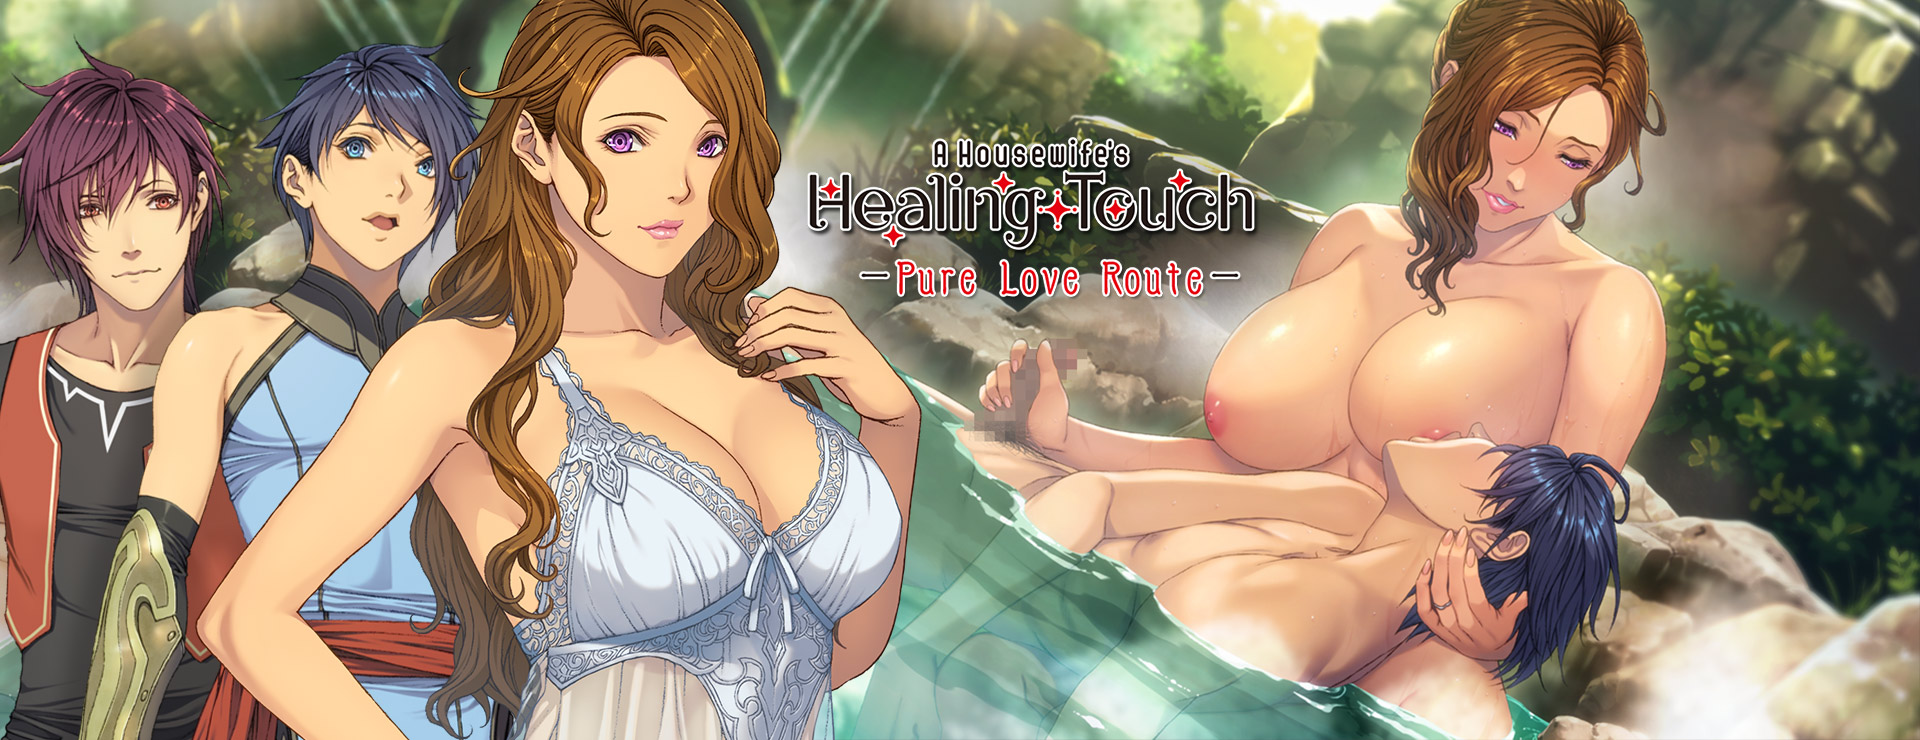 A Housewife's Healing Touch (Pure Love Route) - Action Aventure Jeu